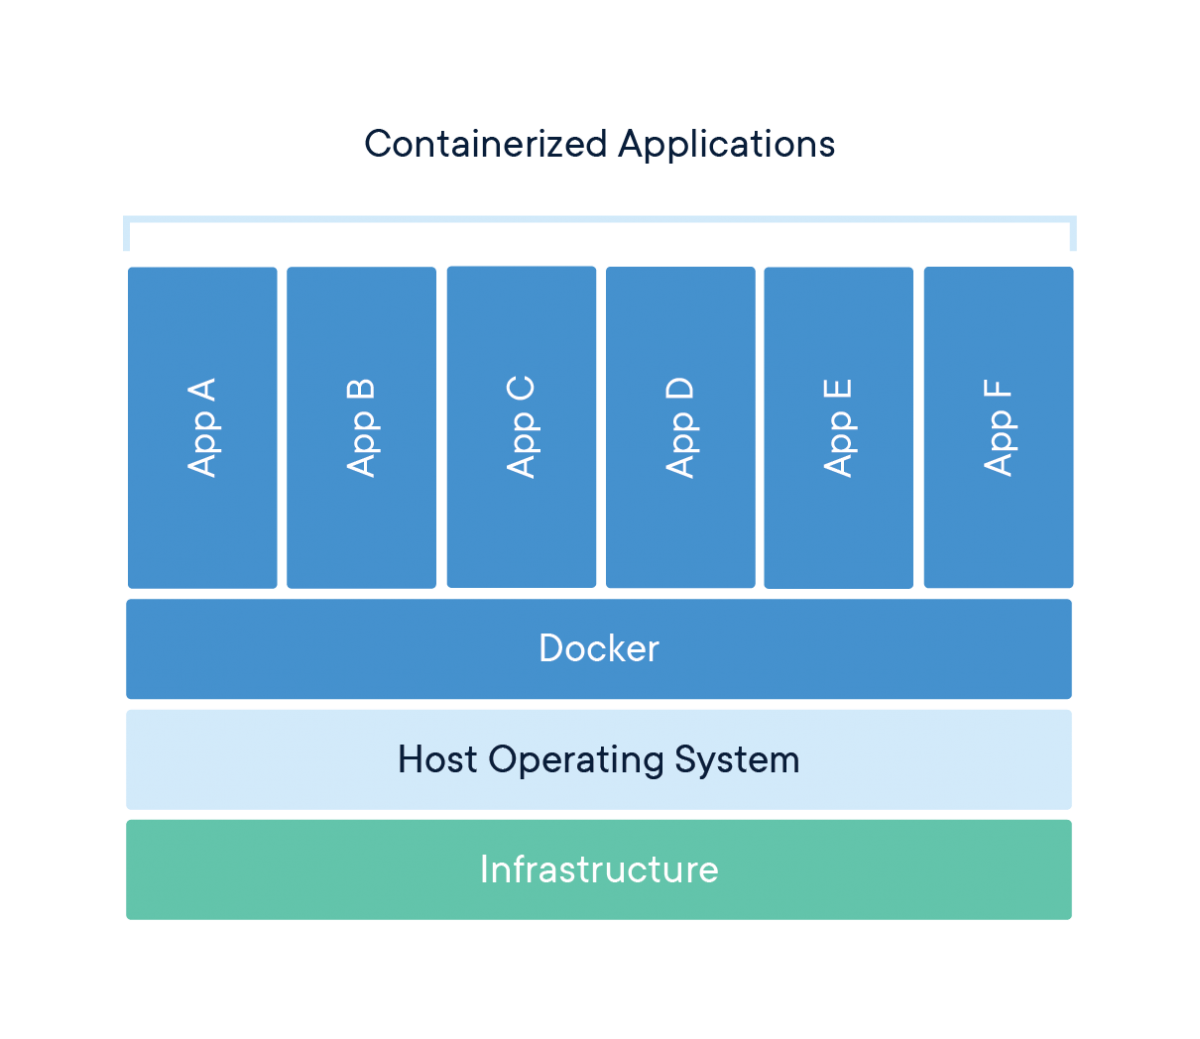 Graphic showing the structure of a containerized application